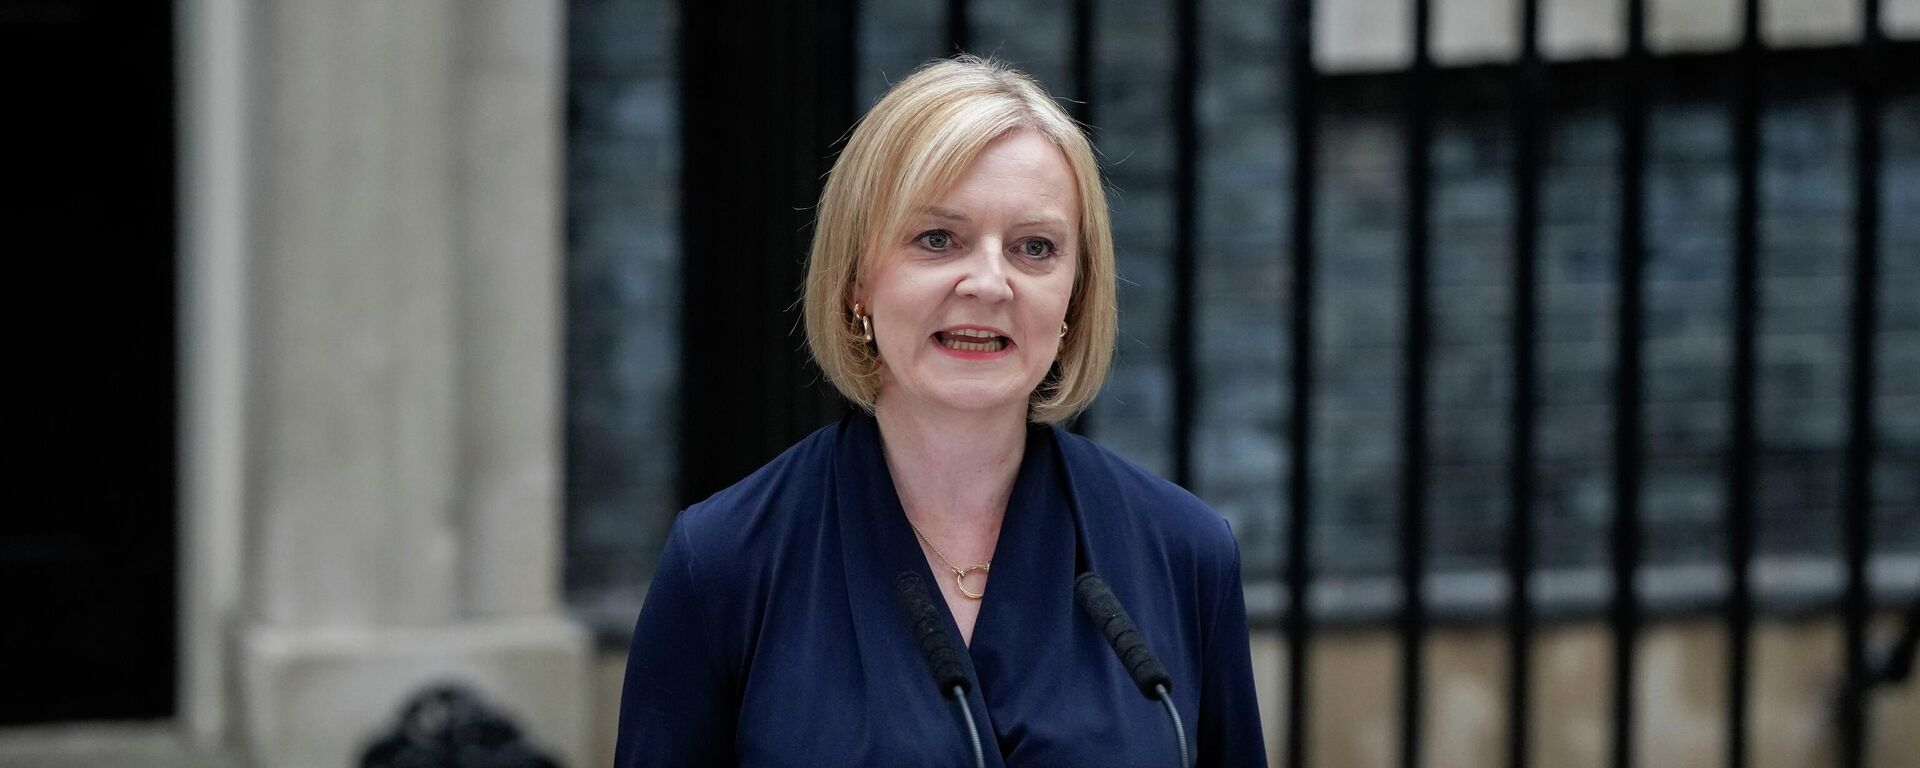 New British Prime Minister Liz Truss makes an address outside Downing Street in London, Tuesday, Sept. 6, 2022 after returning from Balmoral in Scotland where she was formally appointed by Britain's Queen Elizabeth II.  - Sputnik International, 1920, 11.09.2022